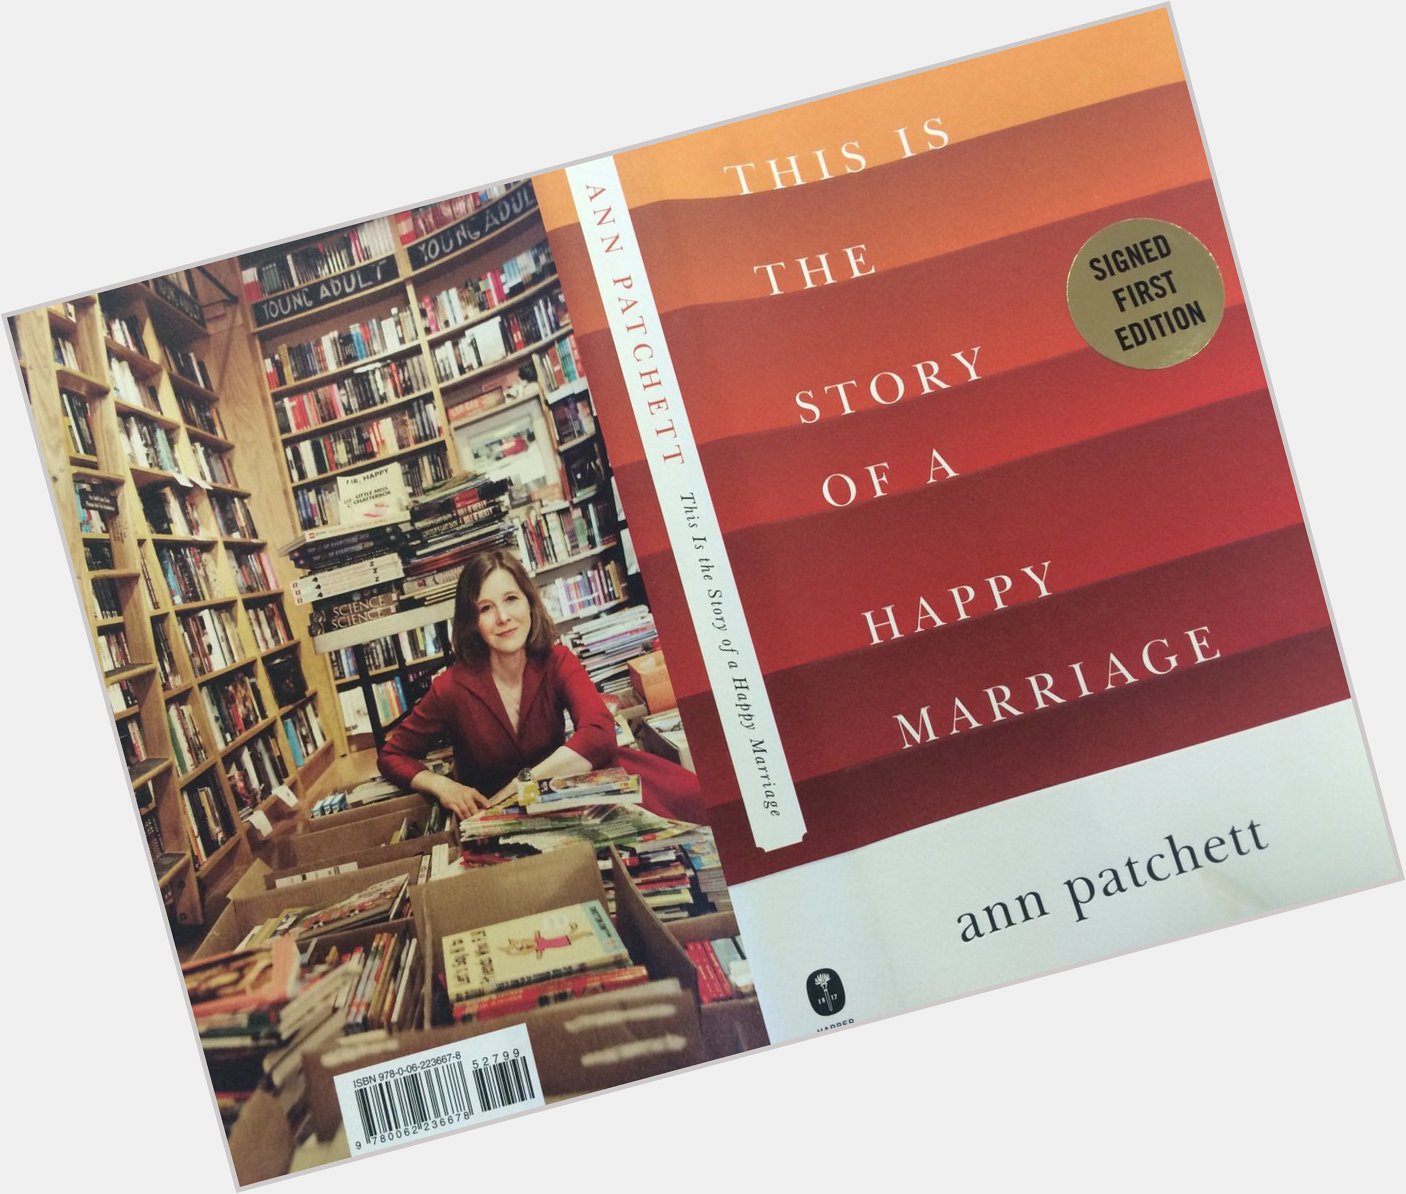 Happy Birthday to our second favorite author/bookstore owner, Ann Patchett 